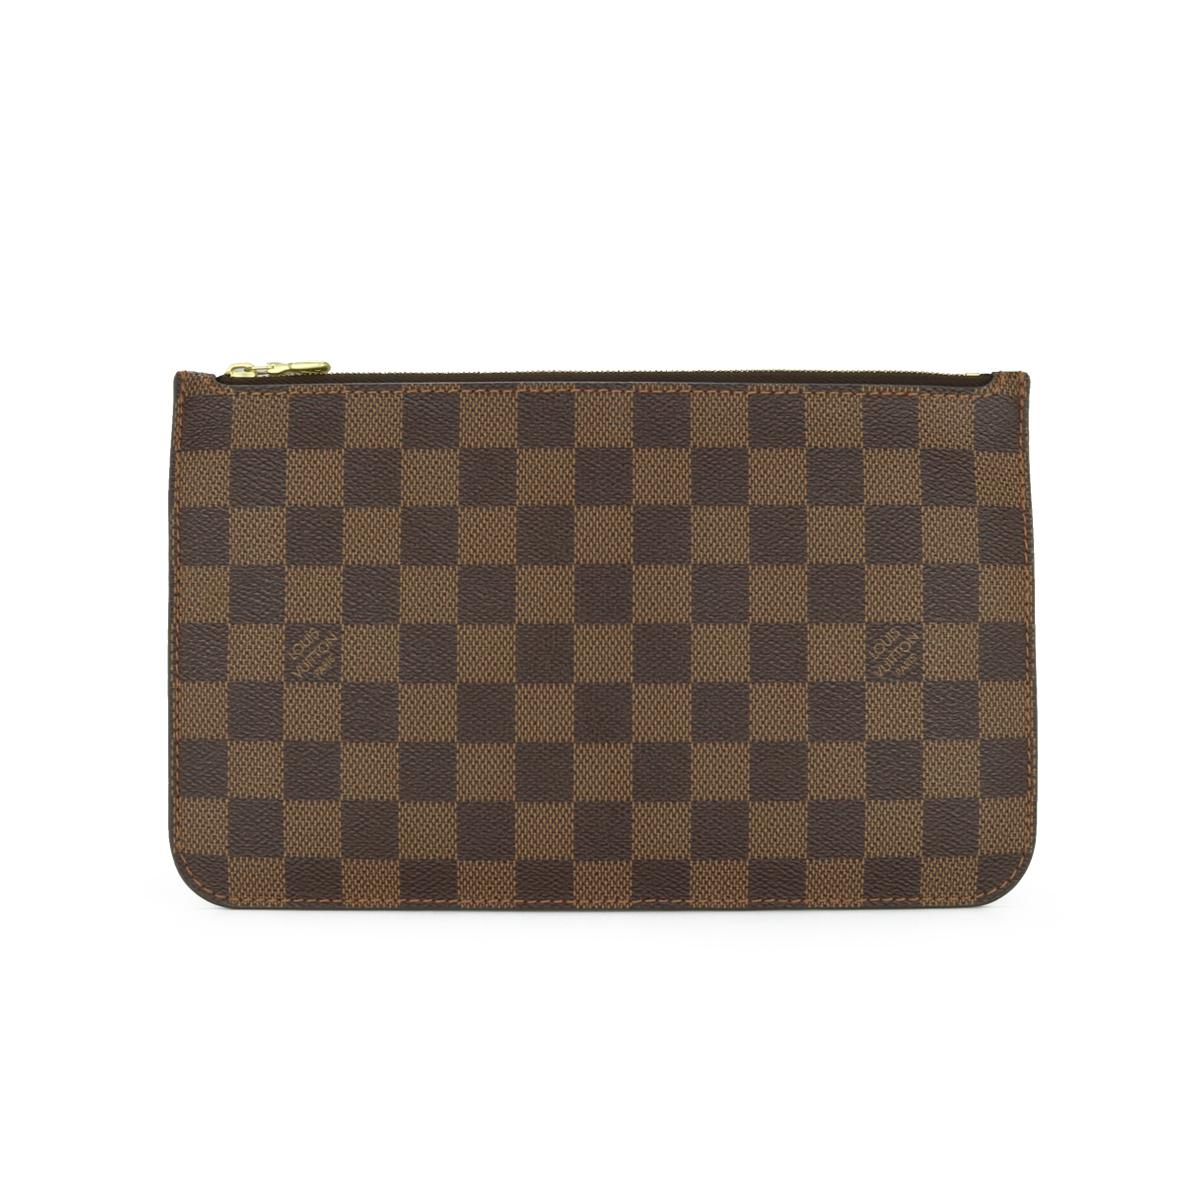 Louis Vuitton Neverfull MM Zip Pochette Pouch in Damier Ebène with Cherry Red Interior 2016.

This pouch is in very good condition. 

- Exterior Condition: Very good condition. There is inking wear to the corners, two topside endpoints and around